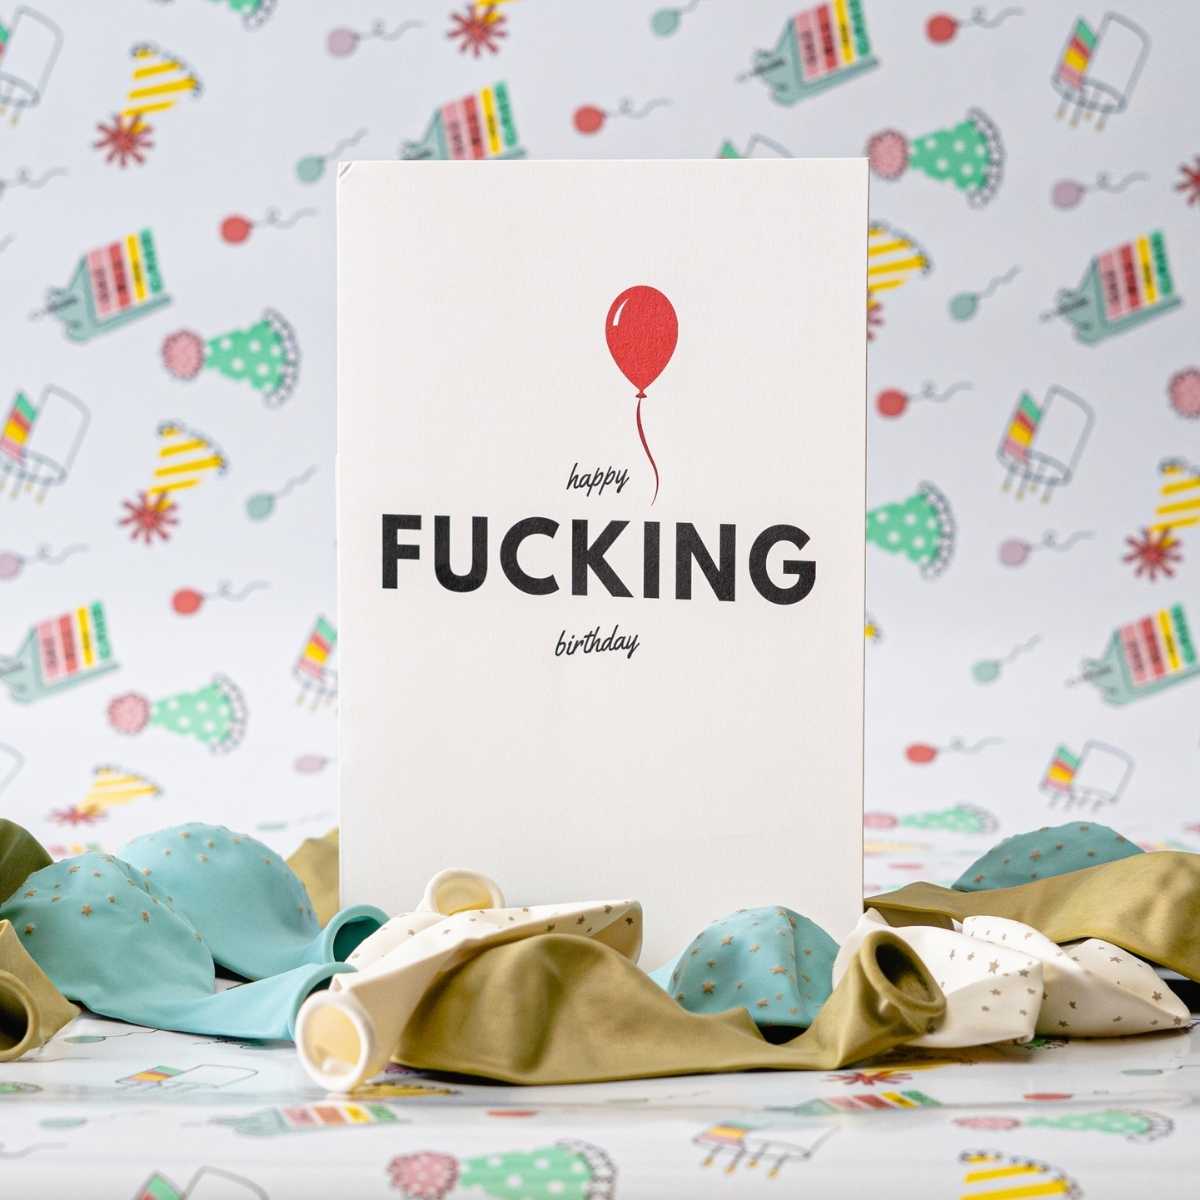 Happy Fucking Birthday To You! Prank Song Card Pranks Anonymous send hilarious pranks and gag gifts to your friends or family.